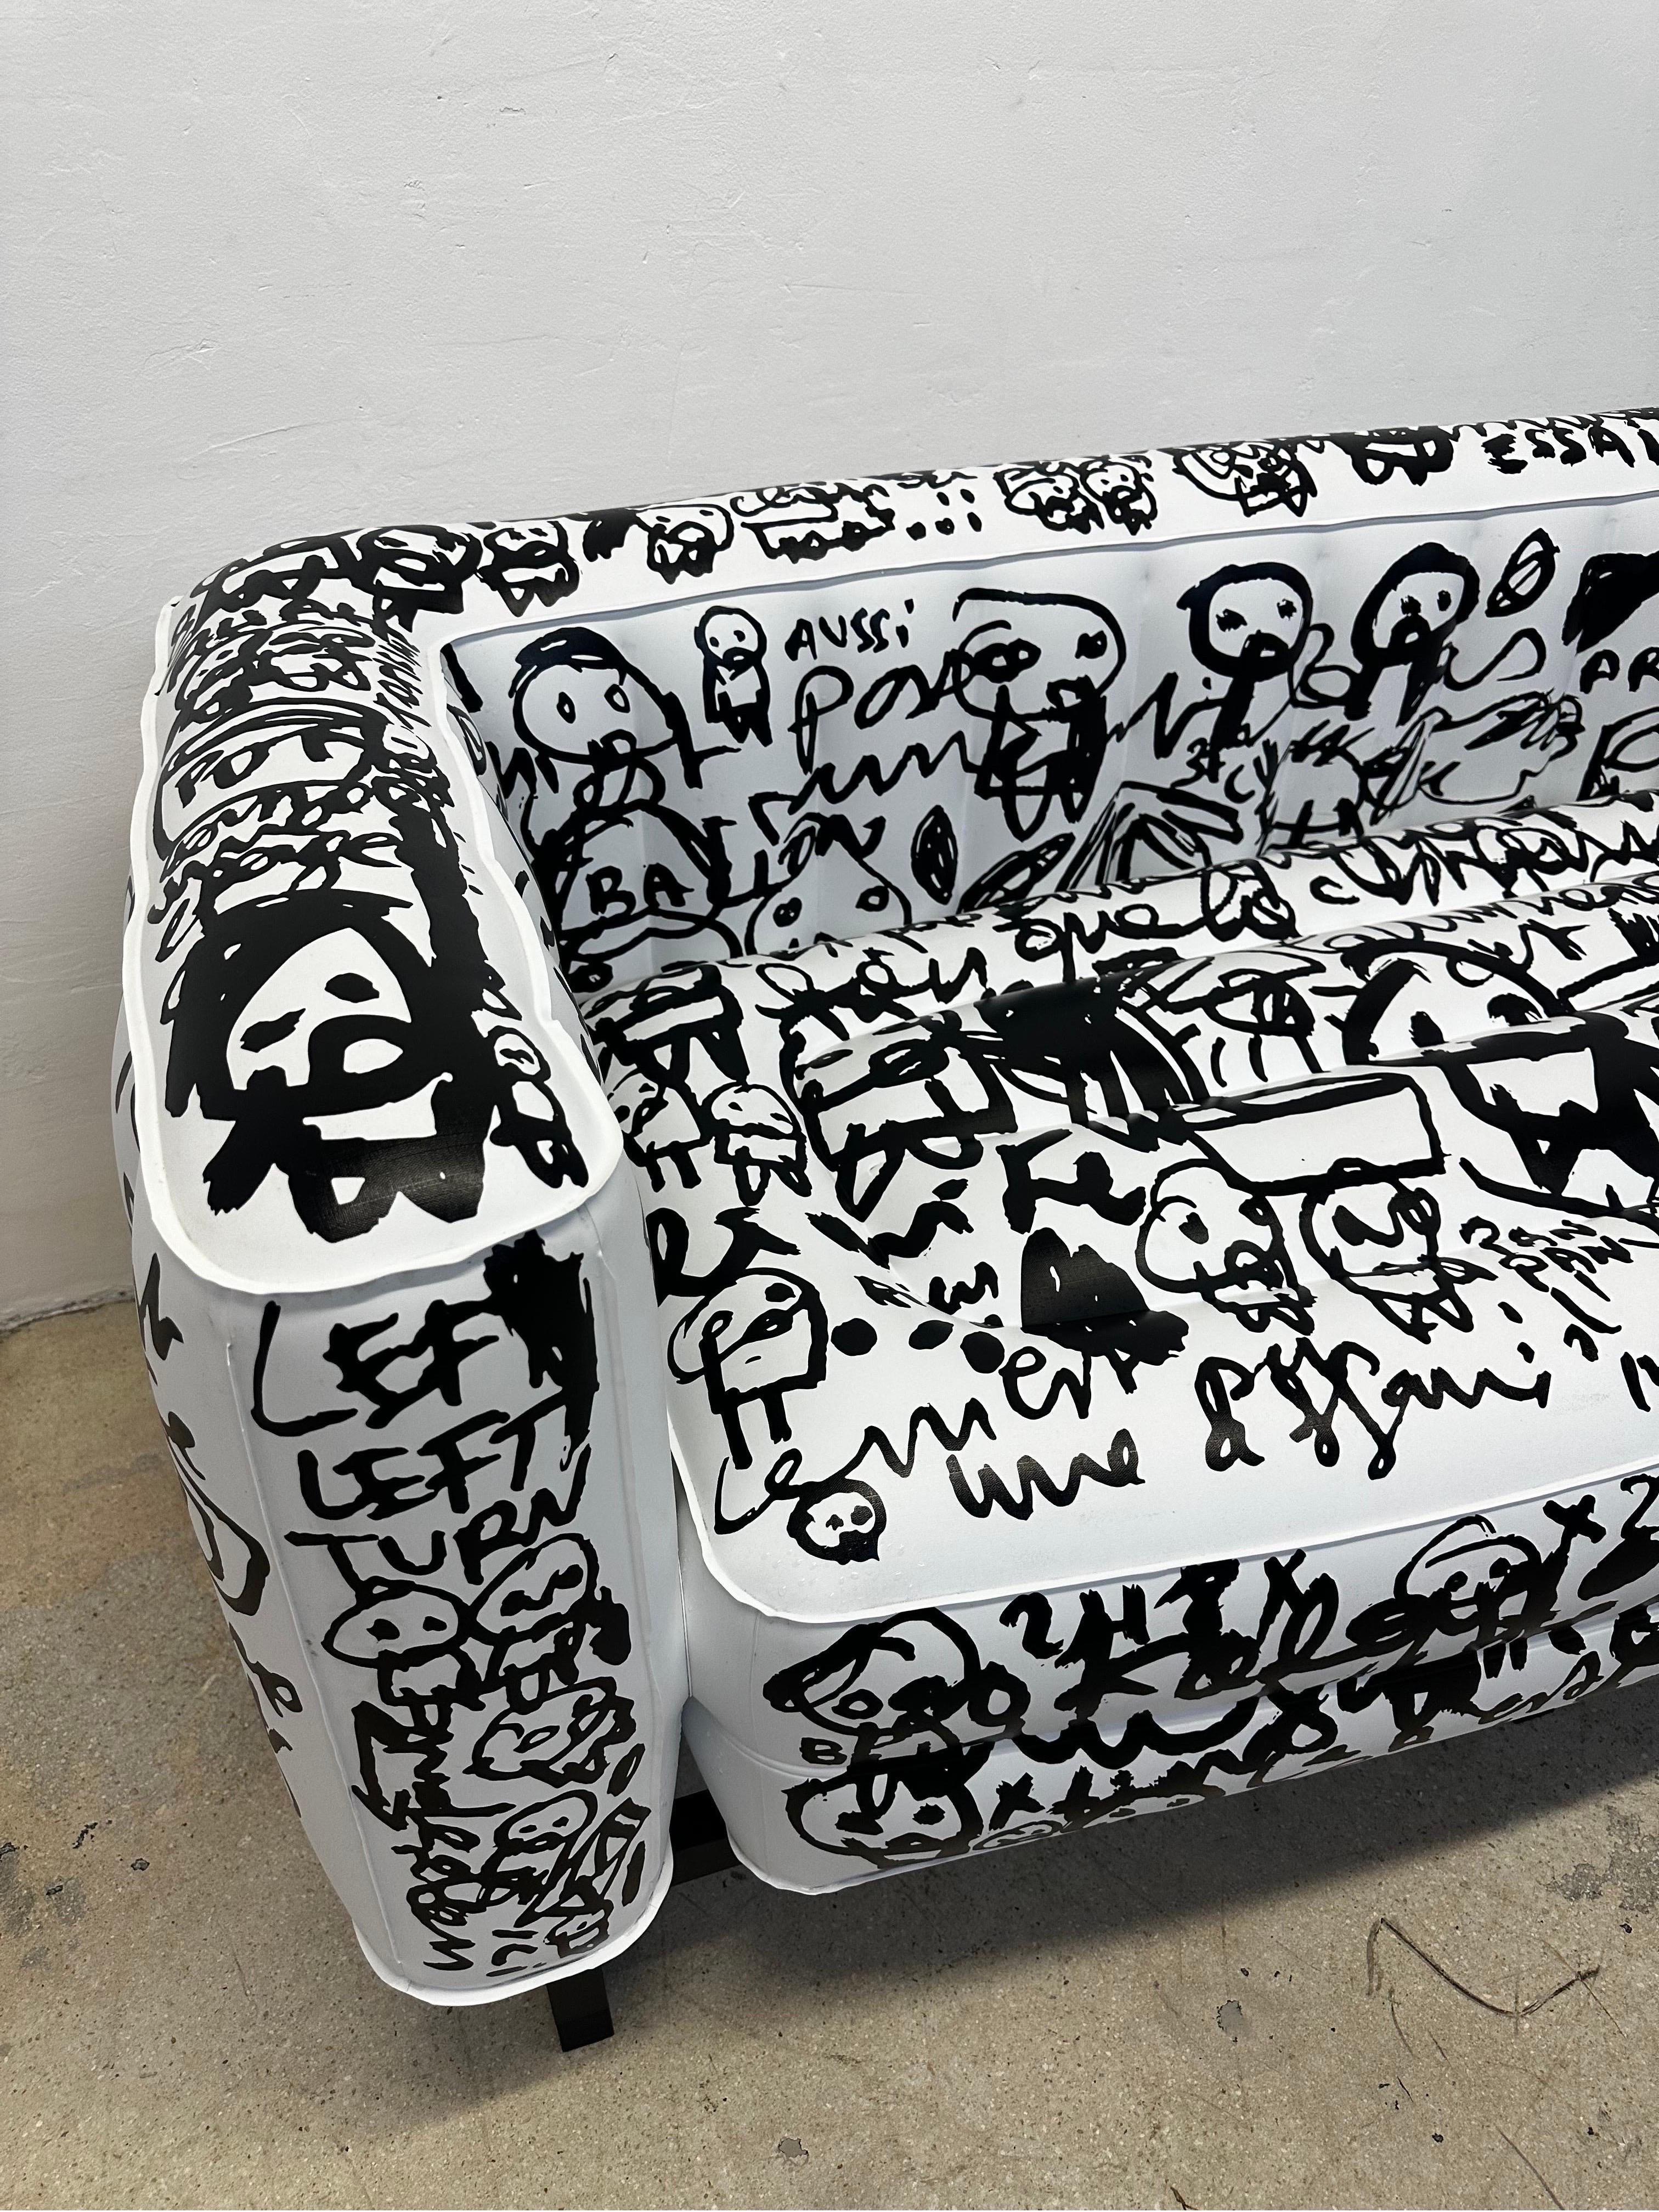 Metal Yomi Nep Limited Edition Cocktail Ruka Sofa by Mojow Design - First Ed. 18/25 For Sale